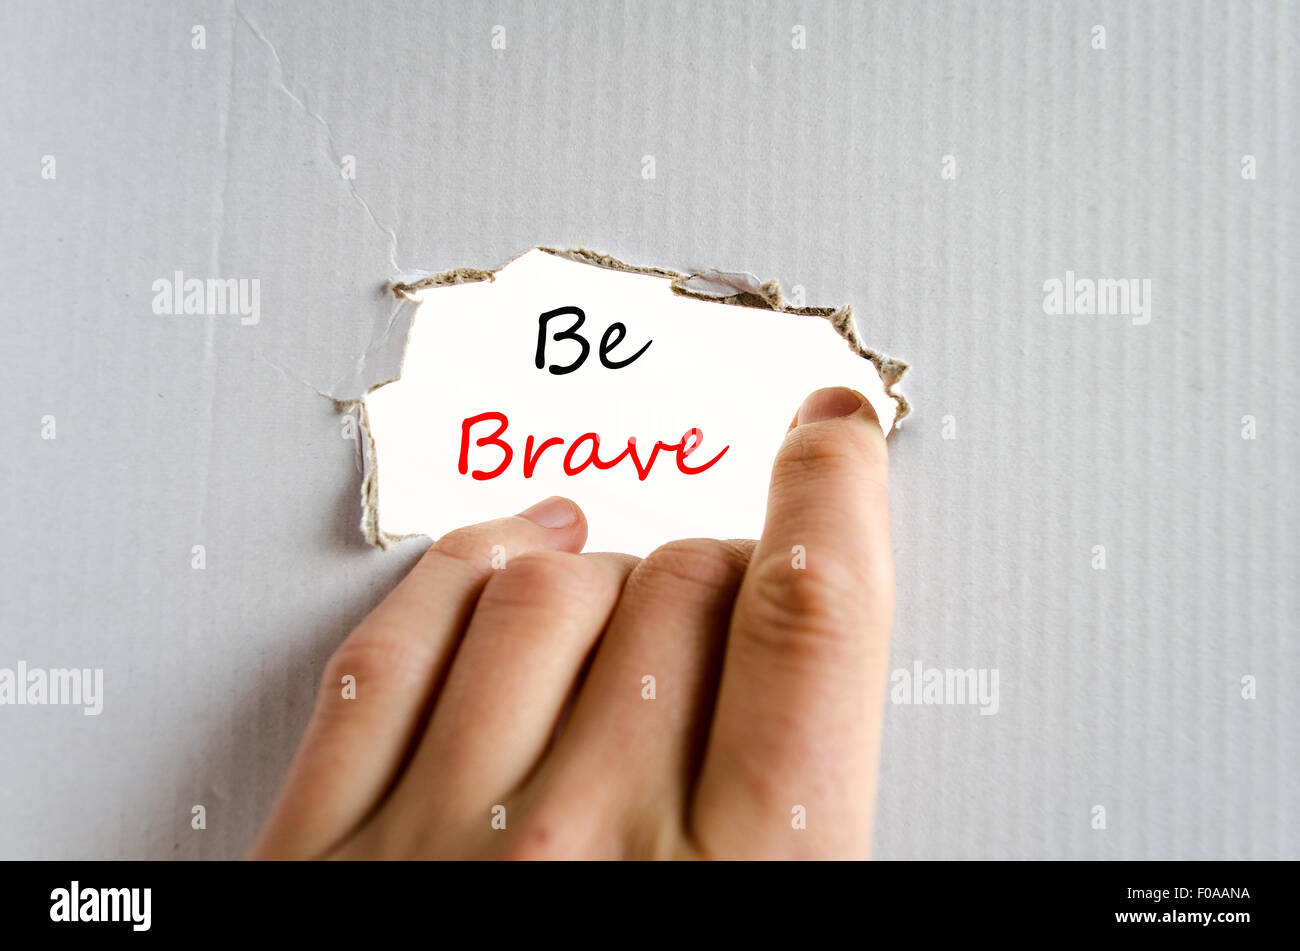 Be brave text concept isolated over white background Stock Photo